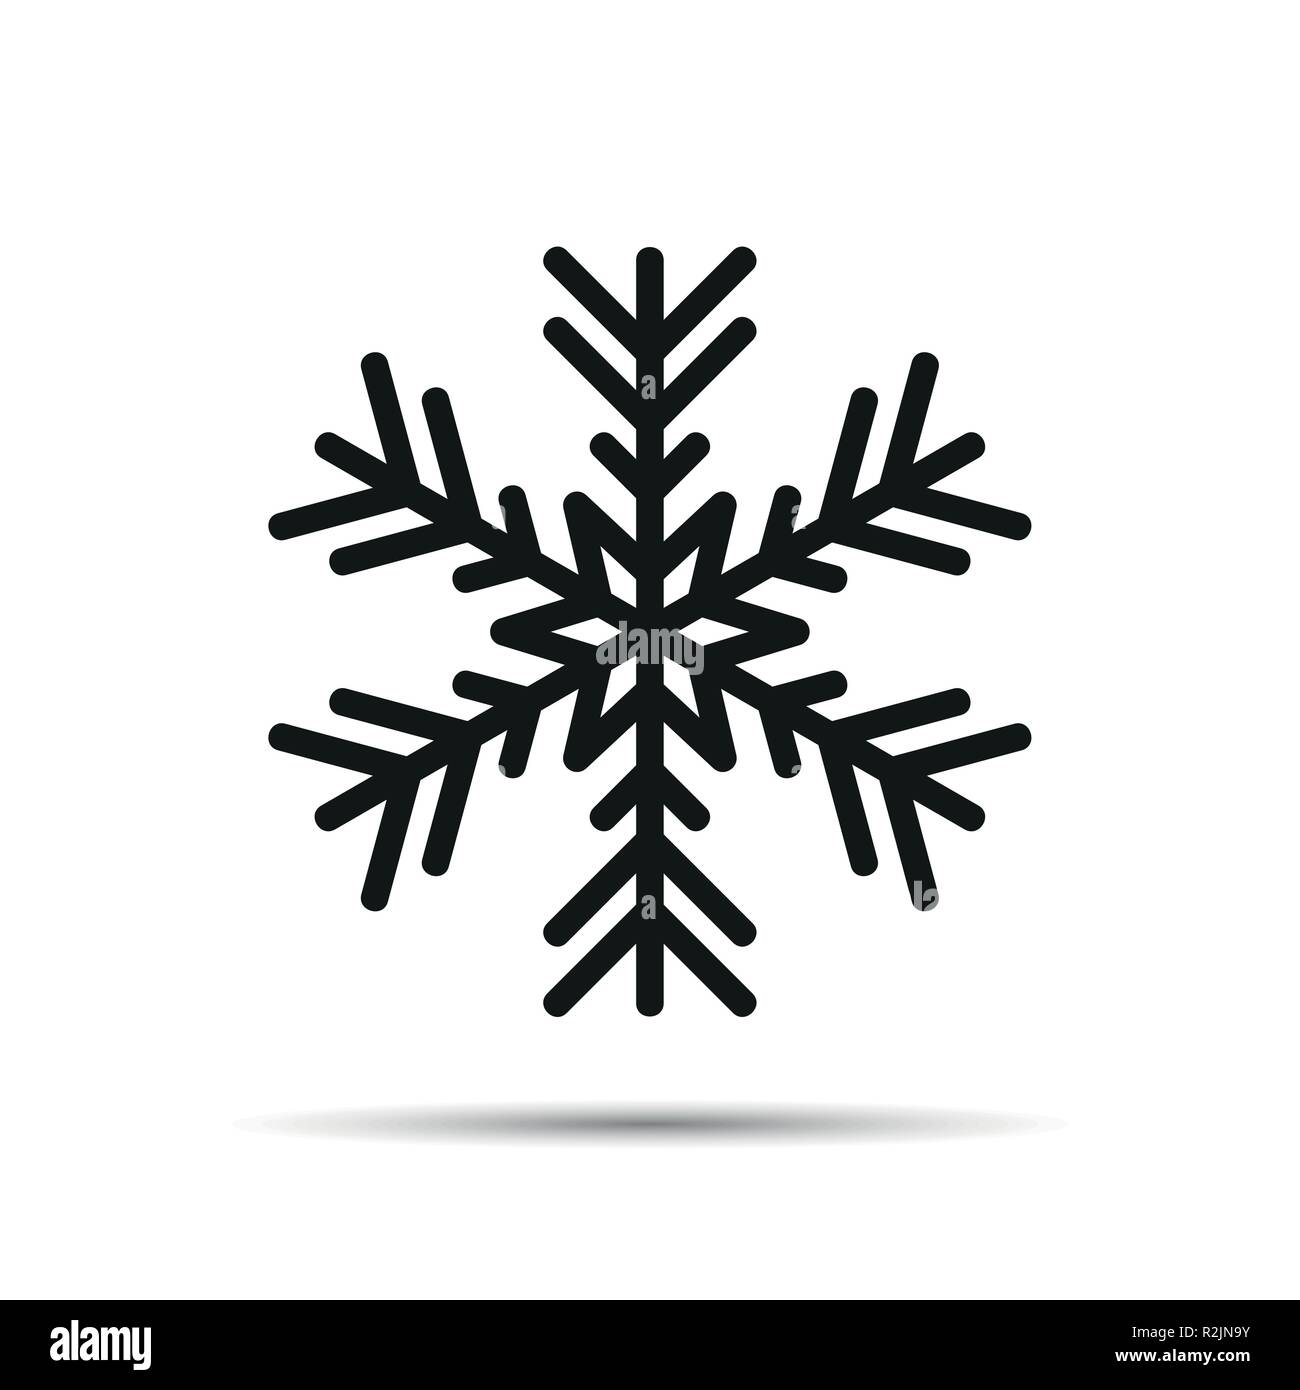 snowflake icon isolated on white background vector illustration EPS10 Stock Vector